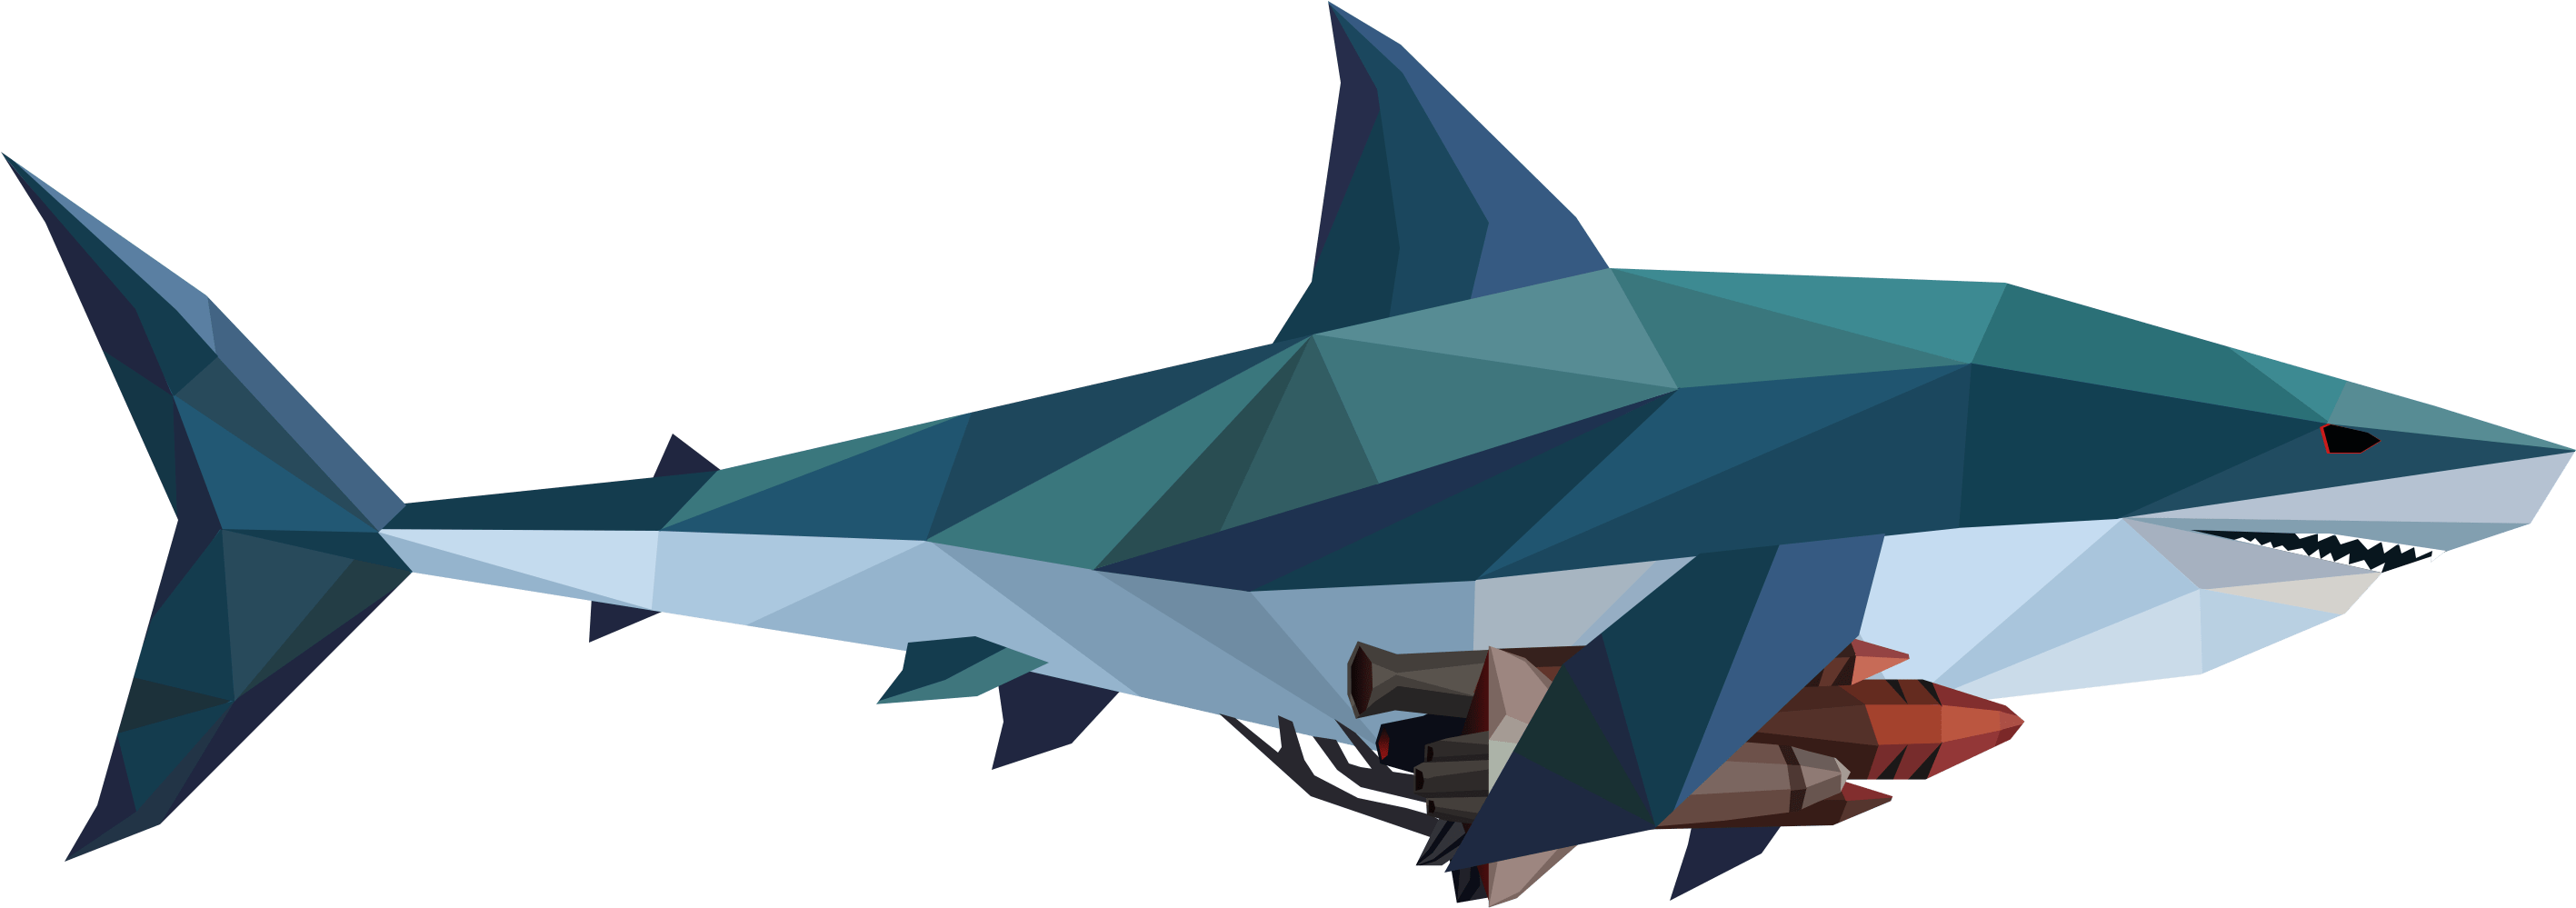 Polygonal 2d Shark - Two-dimensional Space (3000x3000)